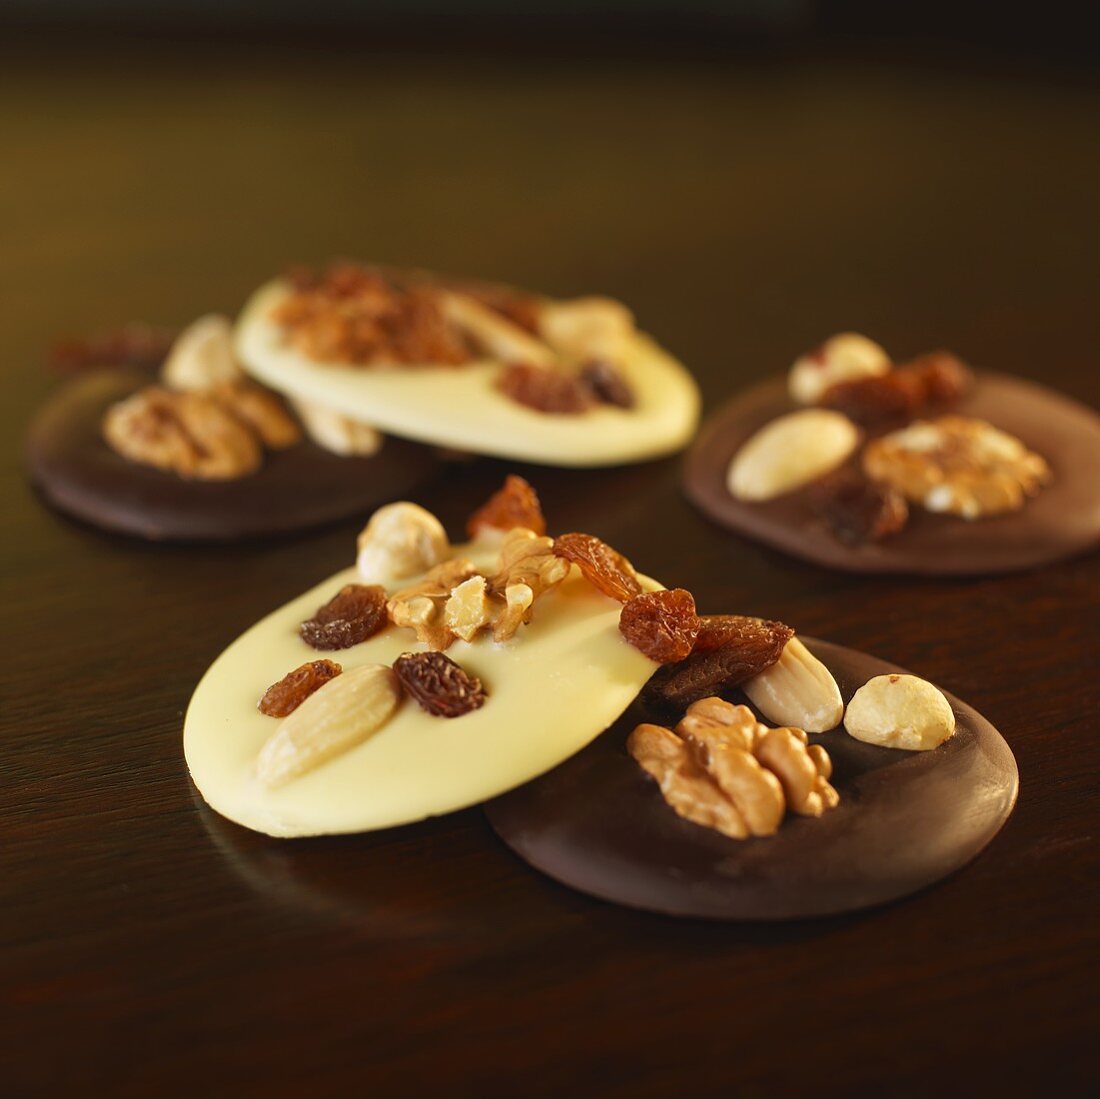 Florentine with nuts and raisins